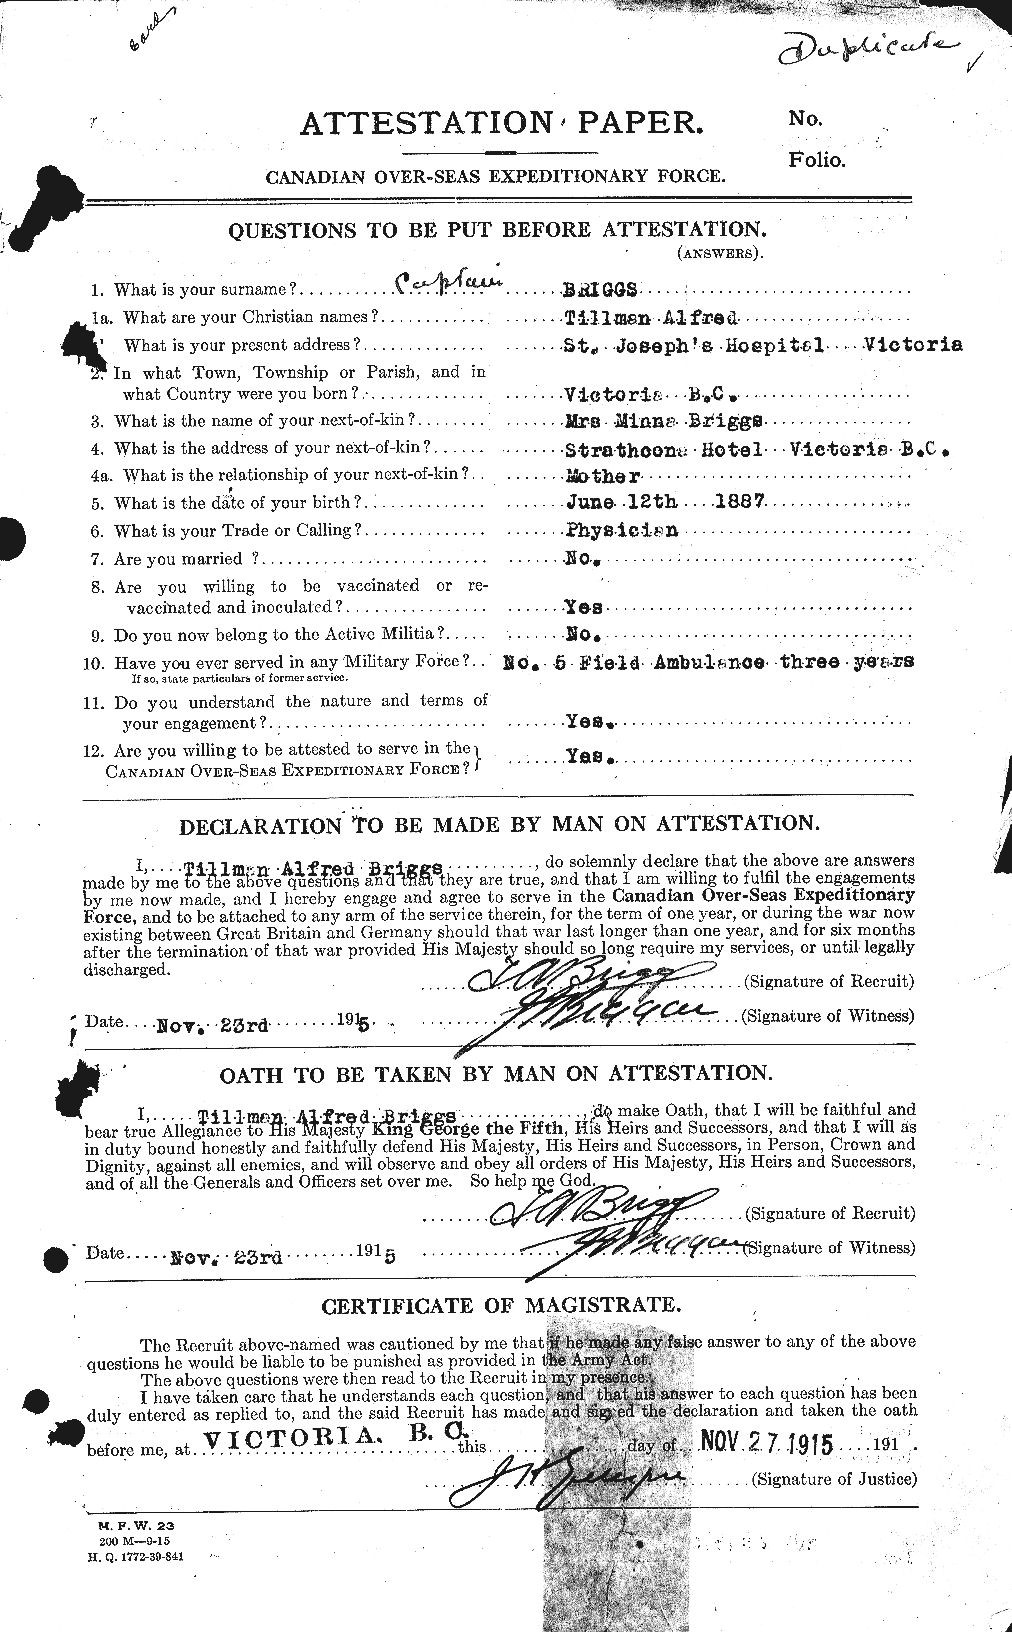 Personnel Records of the First World War - CEF 264108a